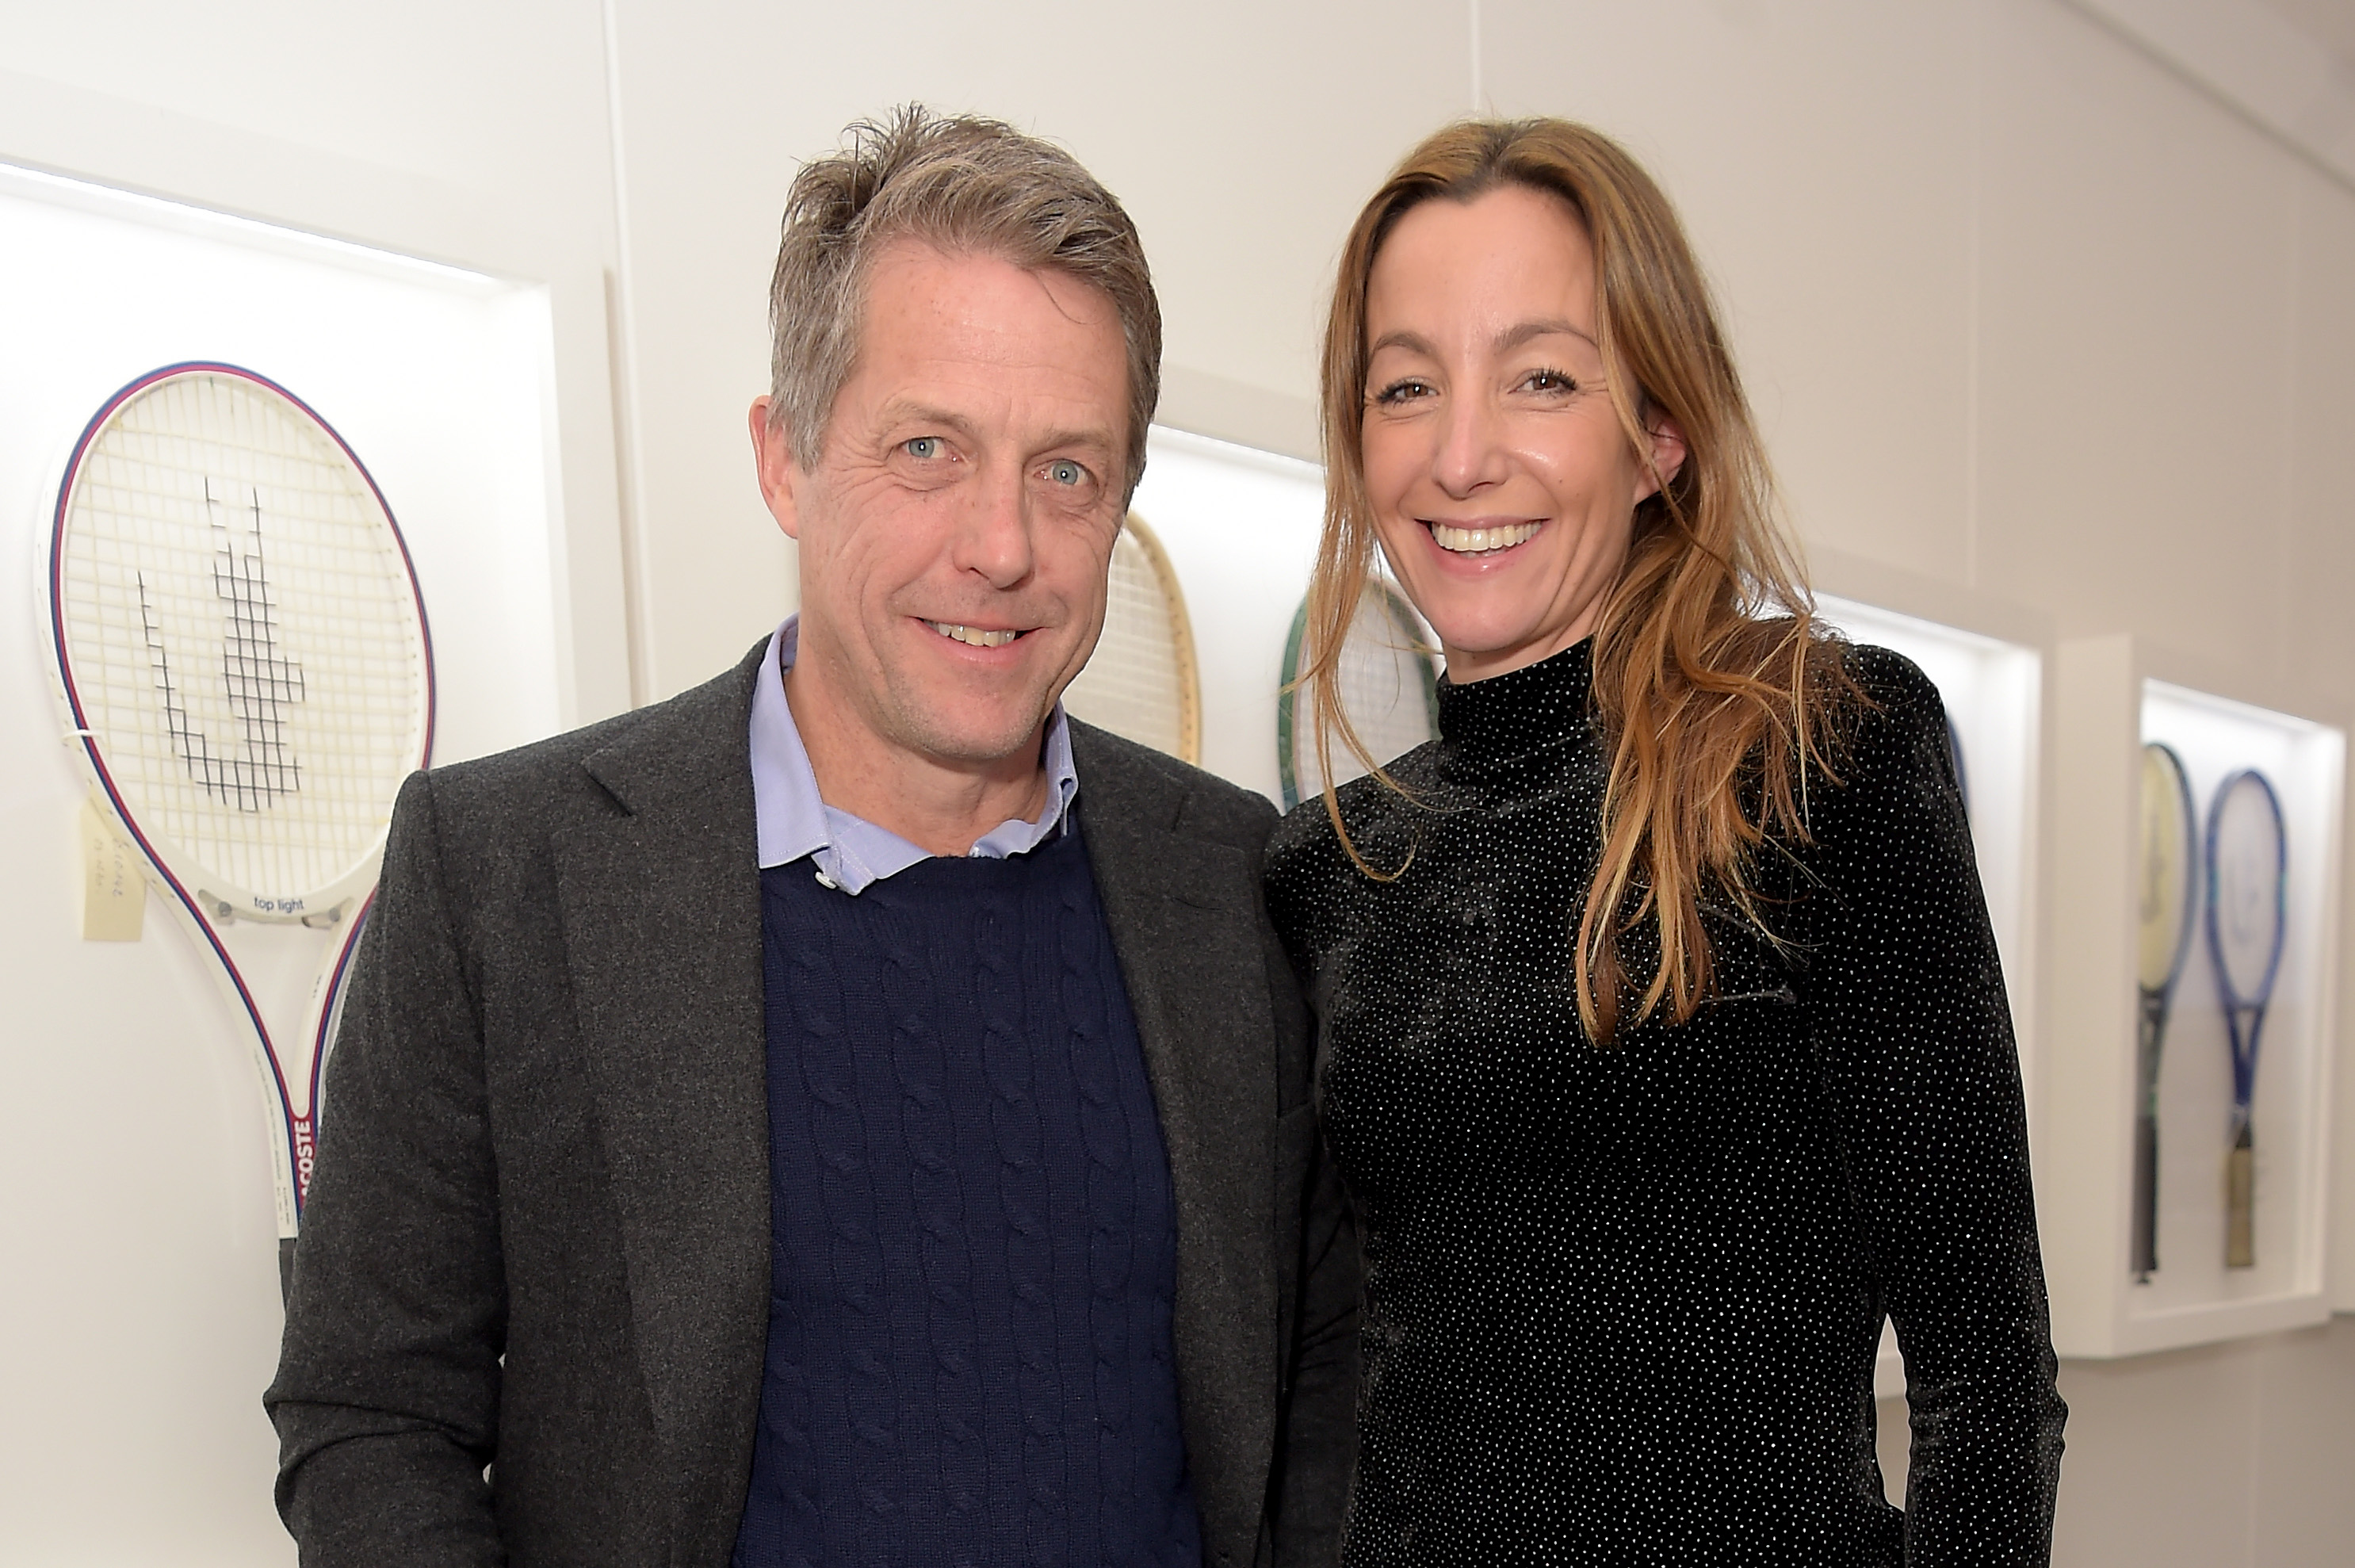 Hugh Grant and Anna Elisabet Eberstein at the Lacoste VIP Lounge of the 2019 ATP World Tour Tennis Finals on November 17, 2019 in London, England | Source: Getty Images